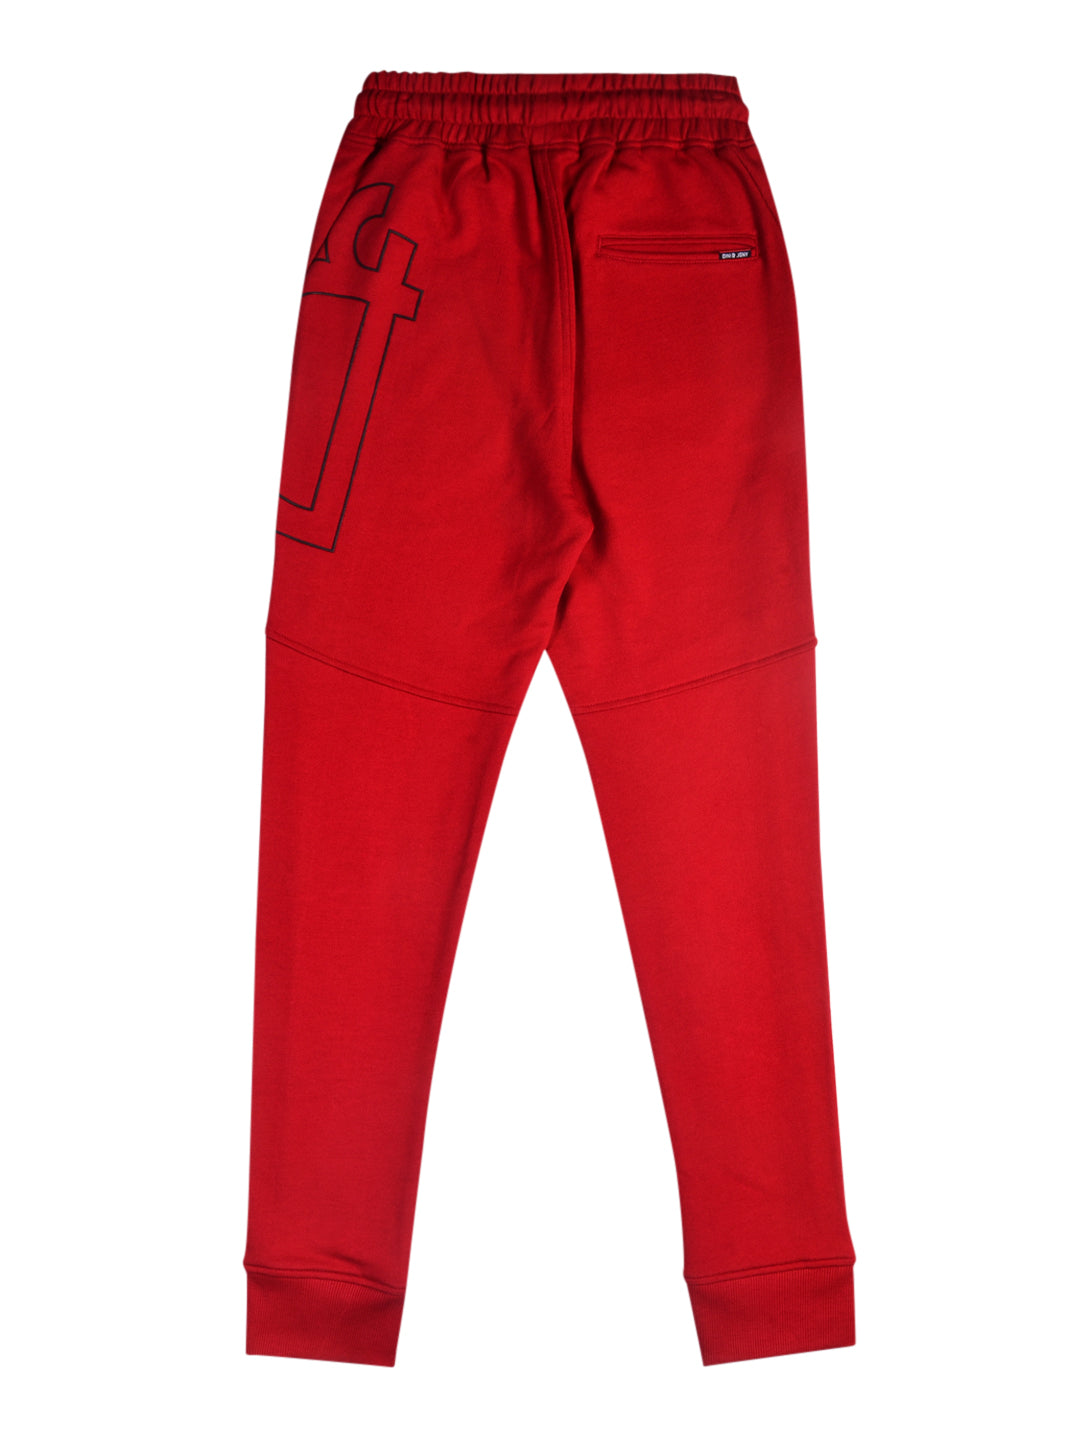 Boys Red Solid Knits Track Pant